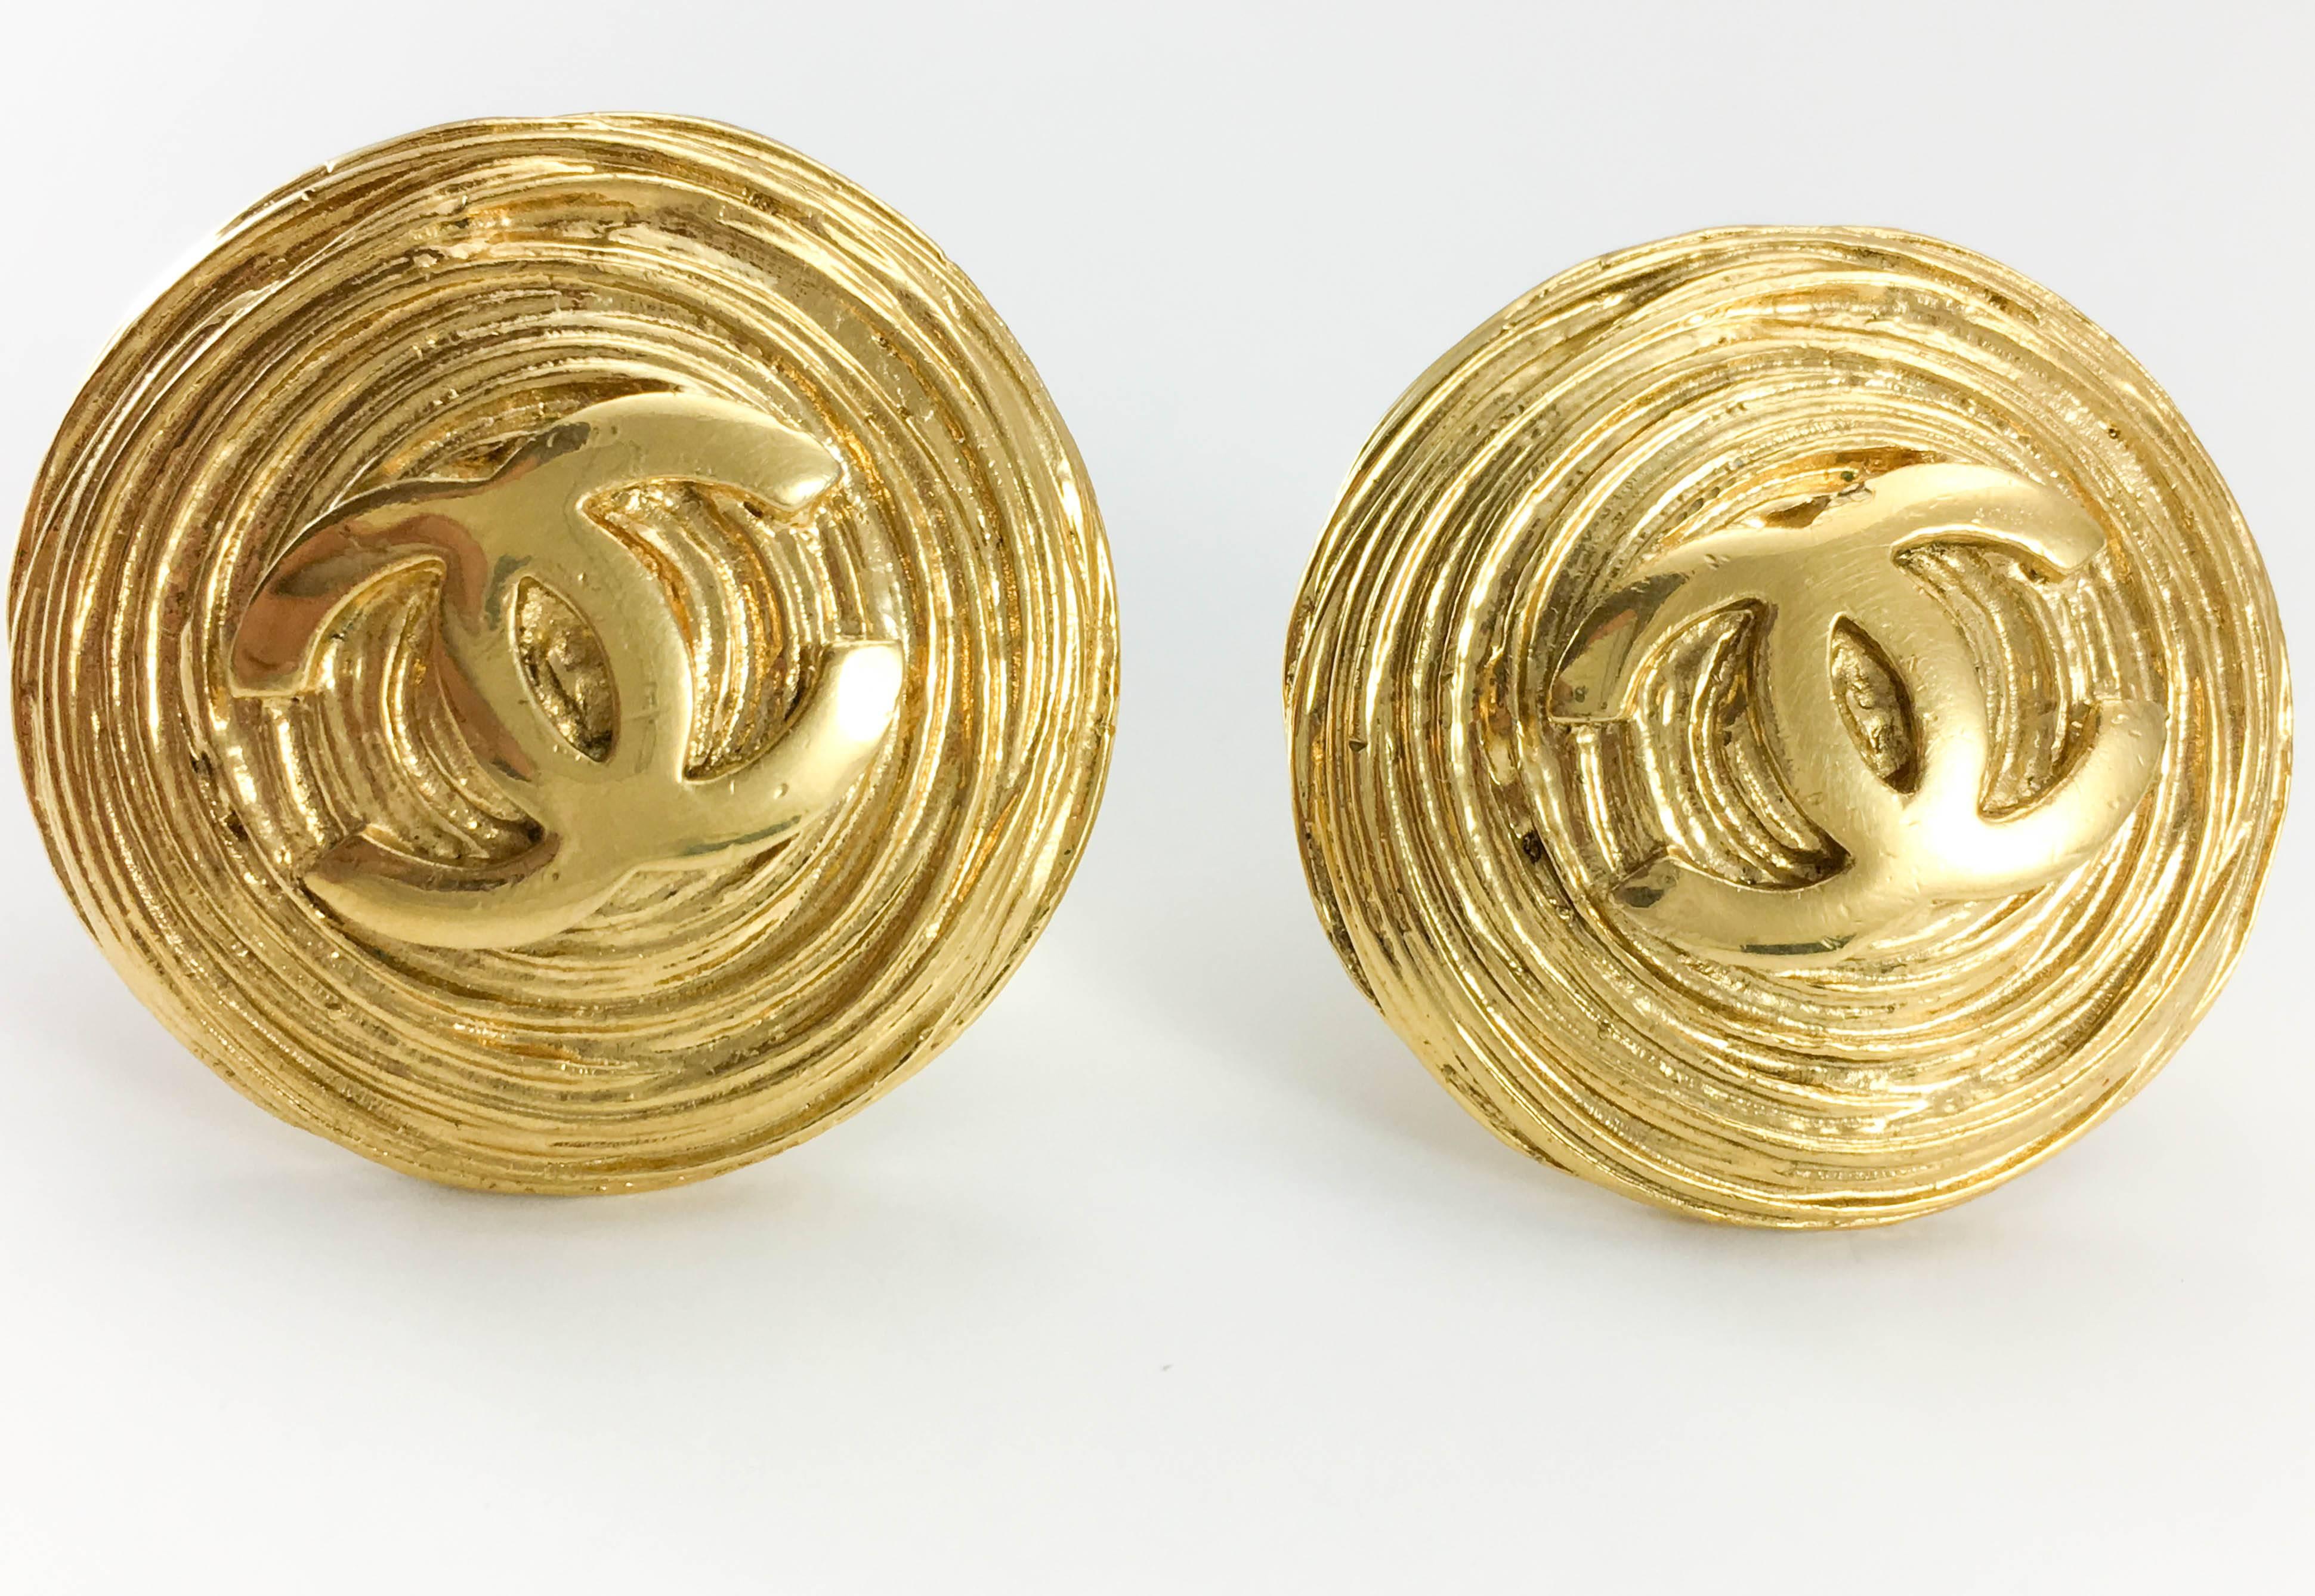 1988 Chanel Gold-Plated Texturized Round Logo Earrings In Excellent Condition For Sale In London, Chelsea